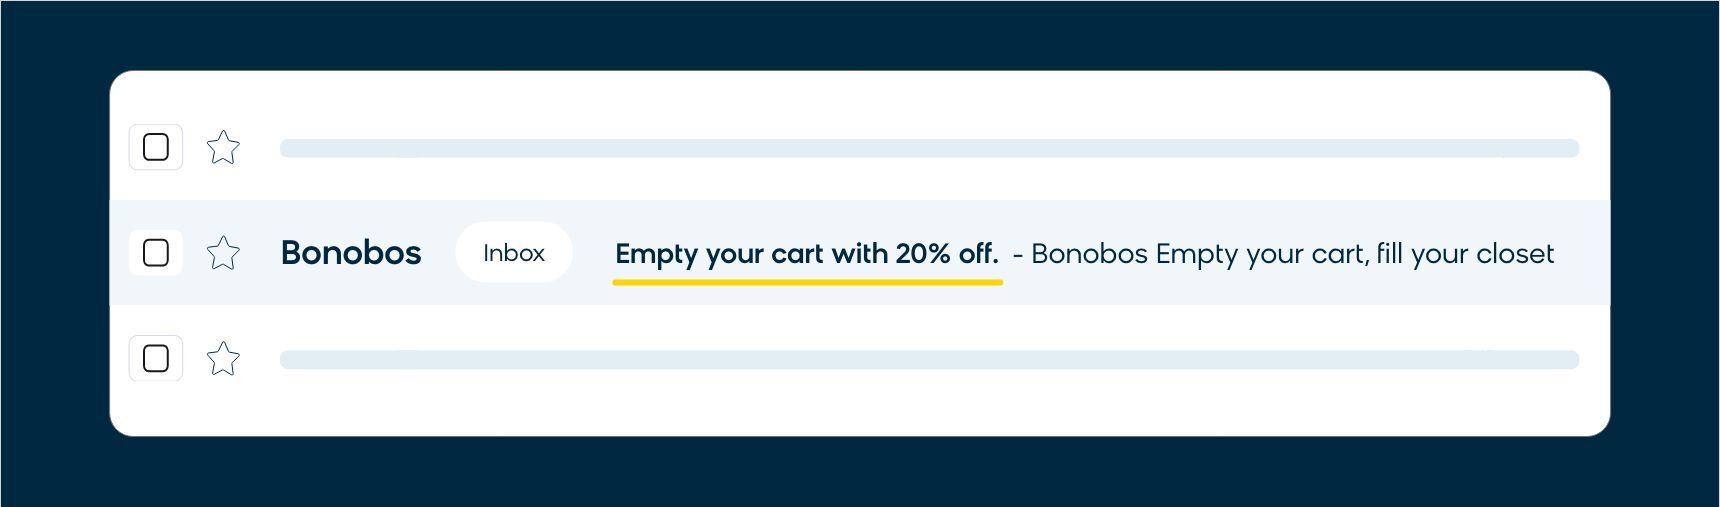 How Bonobos approaches abandoned cart emails